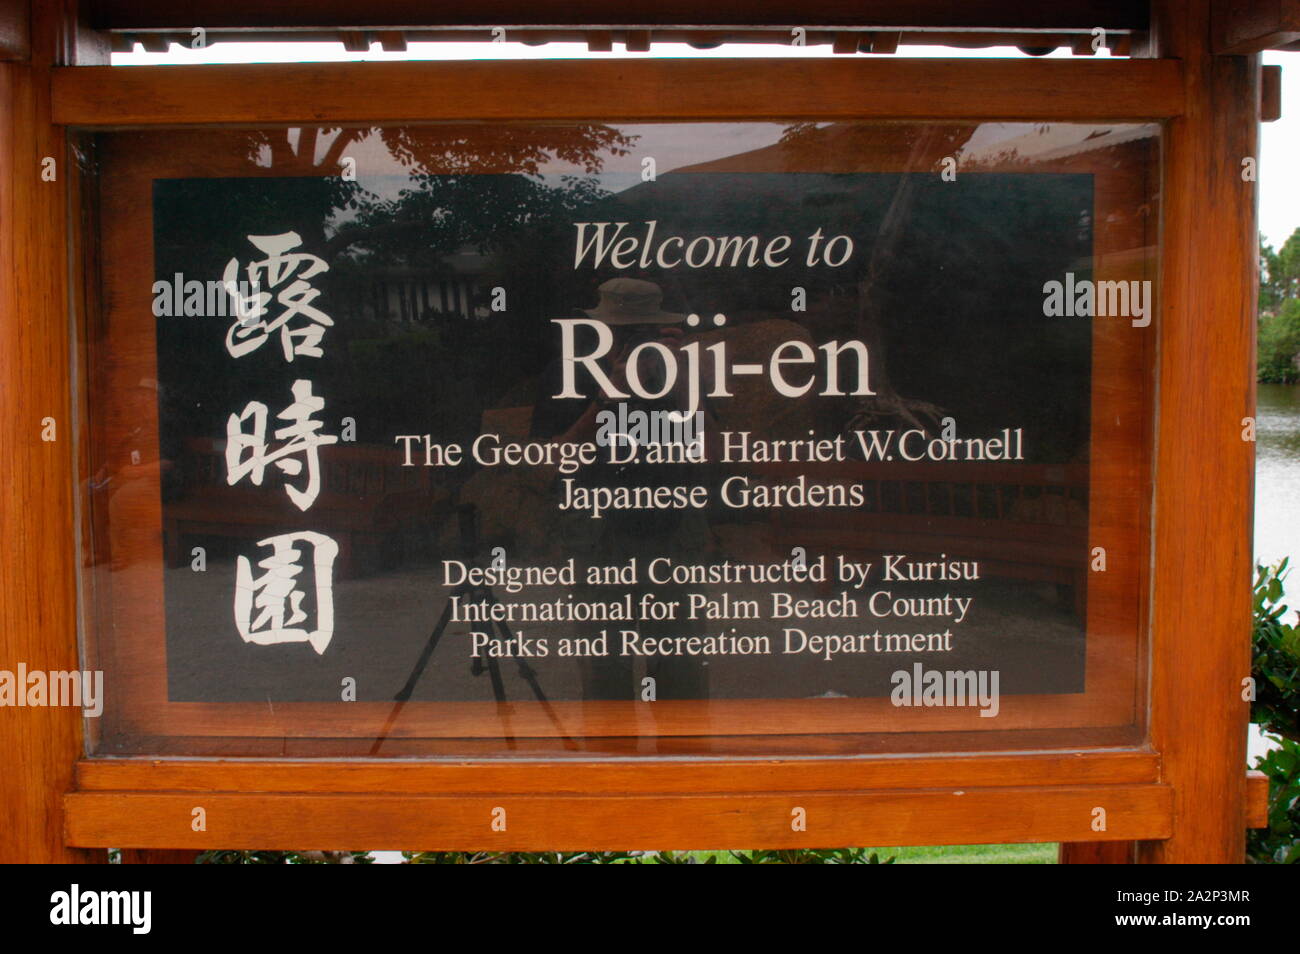 Sign welcoming visitors to Roji-en, part of the Morikami Japanese Gardens, Delray Beach, Palm Beach County, Florida Stock Photo